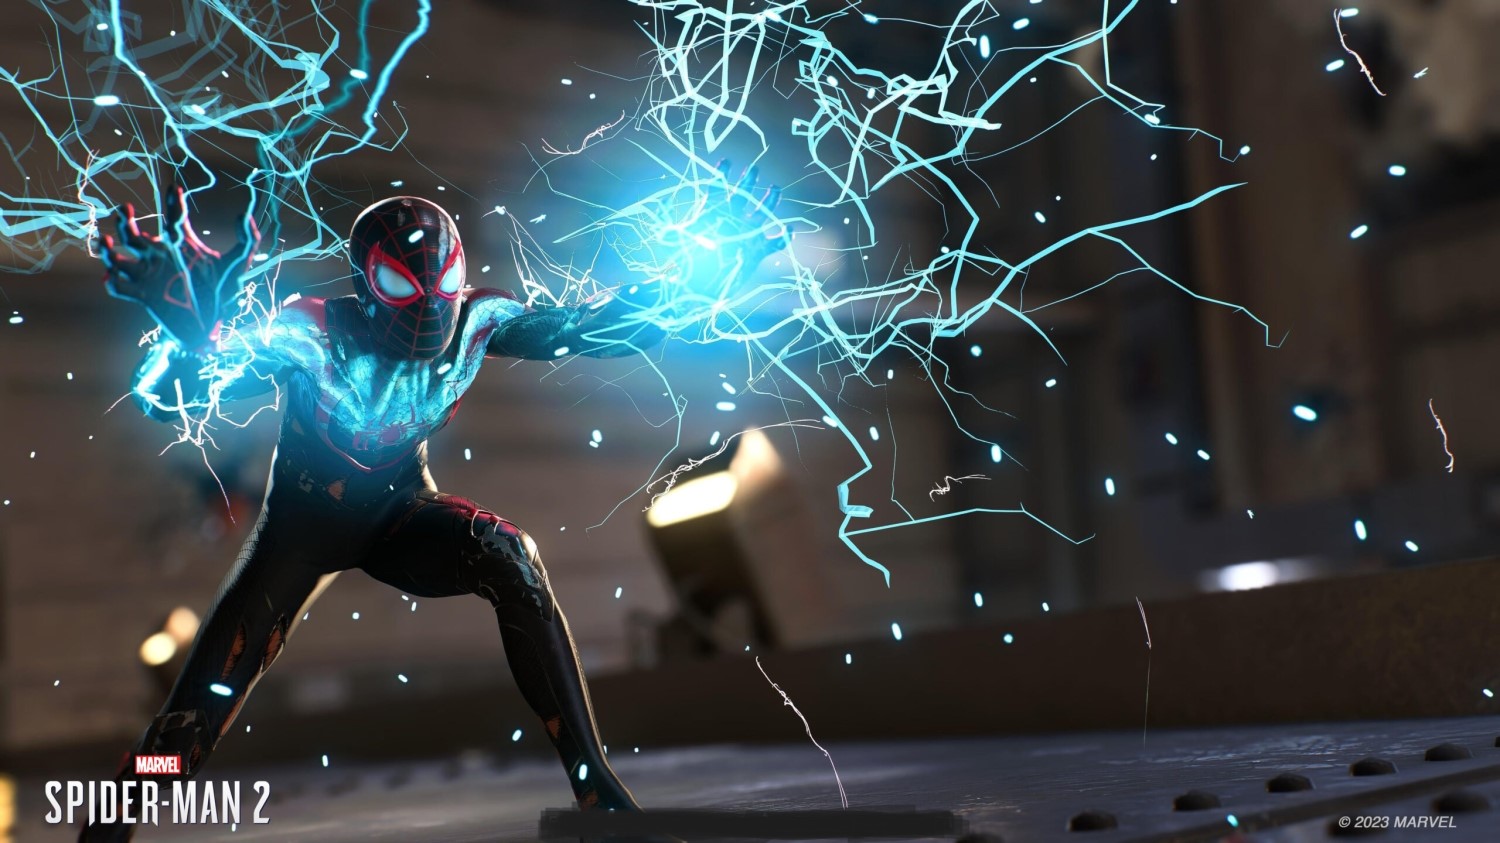 Miles Morales shoots electricity